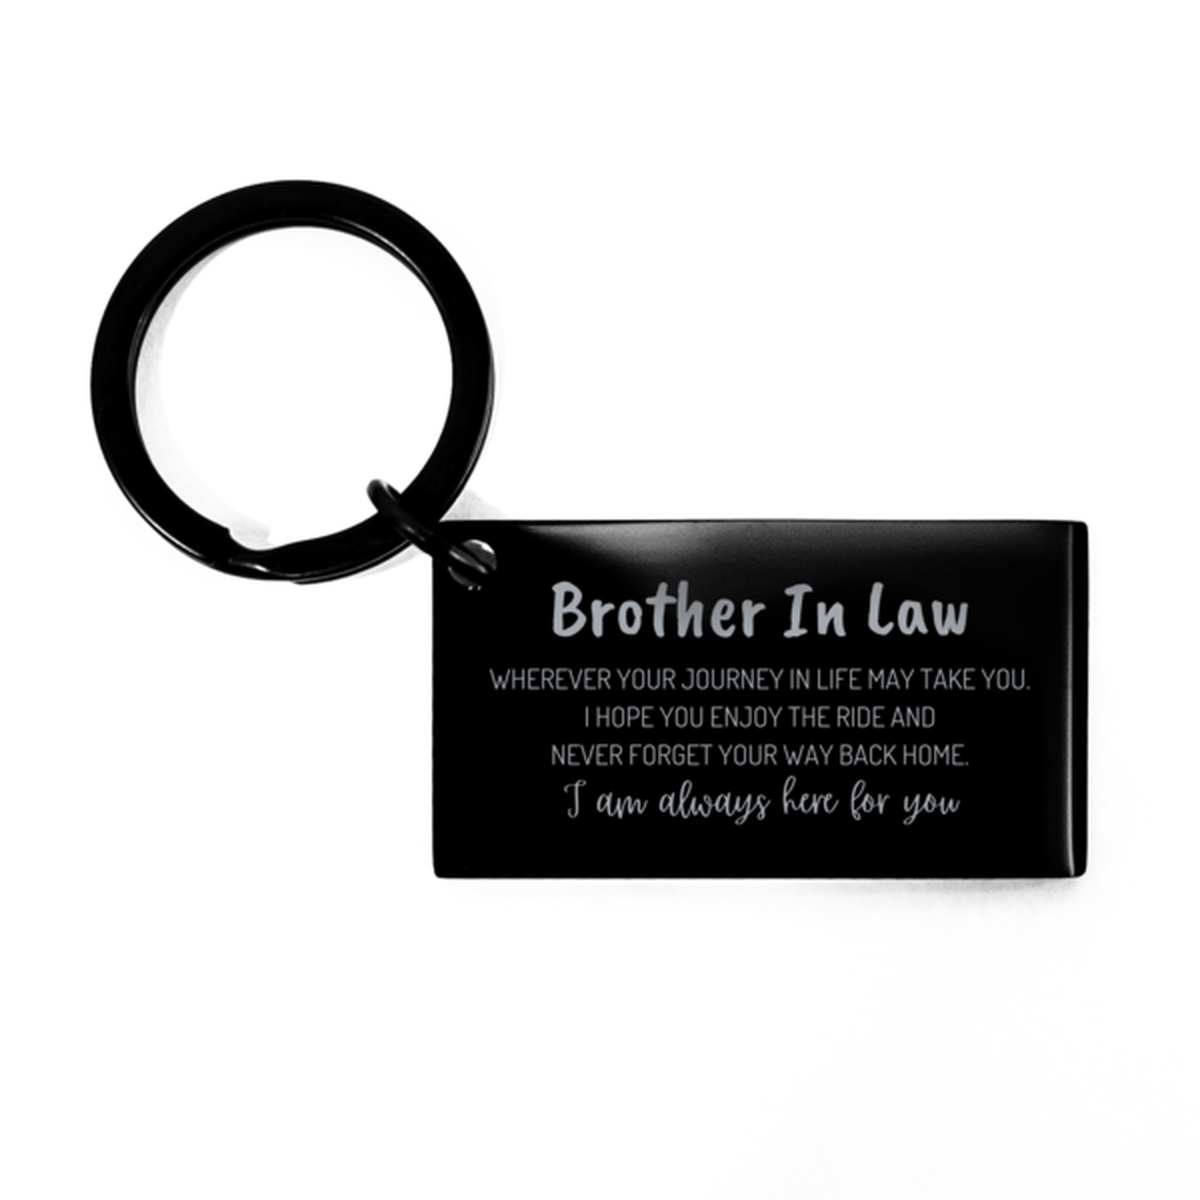 Brother In Law wherever your journey in life may take you, I am always here for you Brother In Law Keychain, Awesome Christmas Gifts For Brother In Law, Brother In Law Birthday Gifts for Men Women Family Loved One